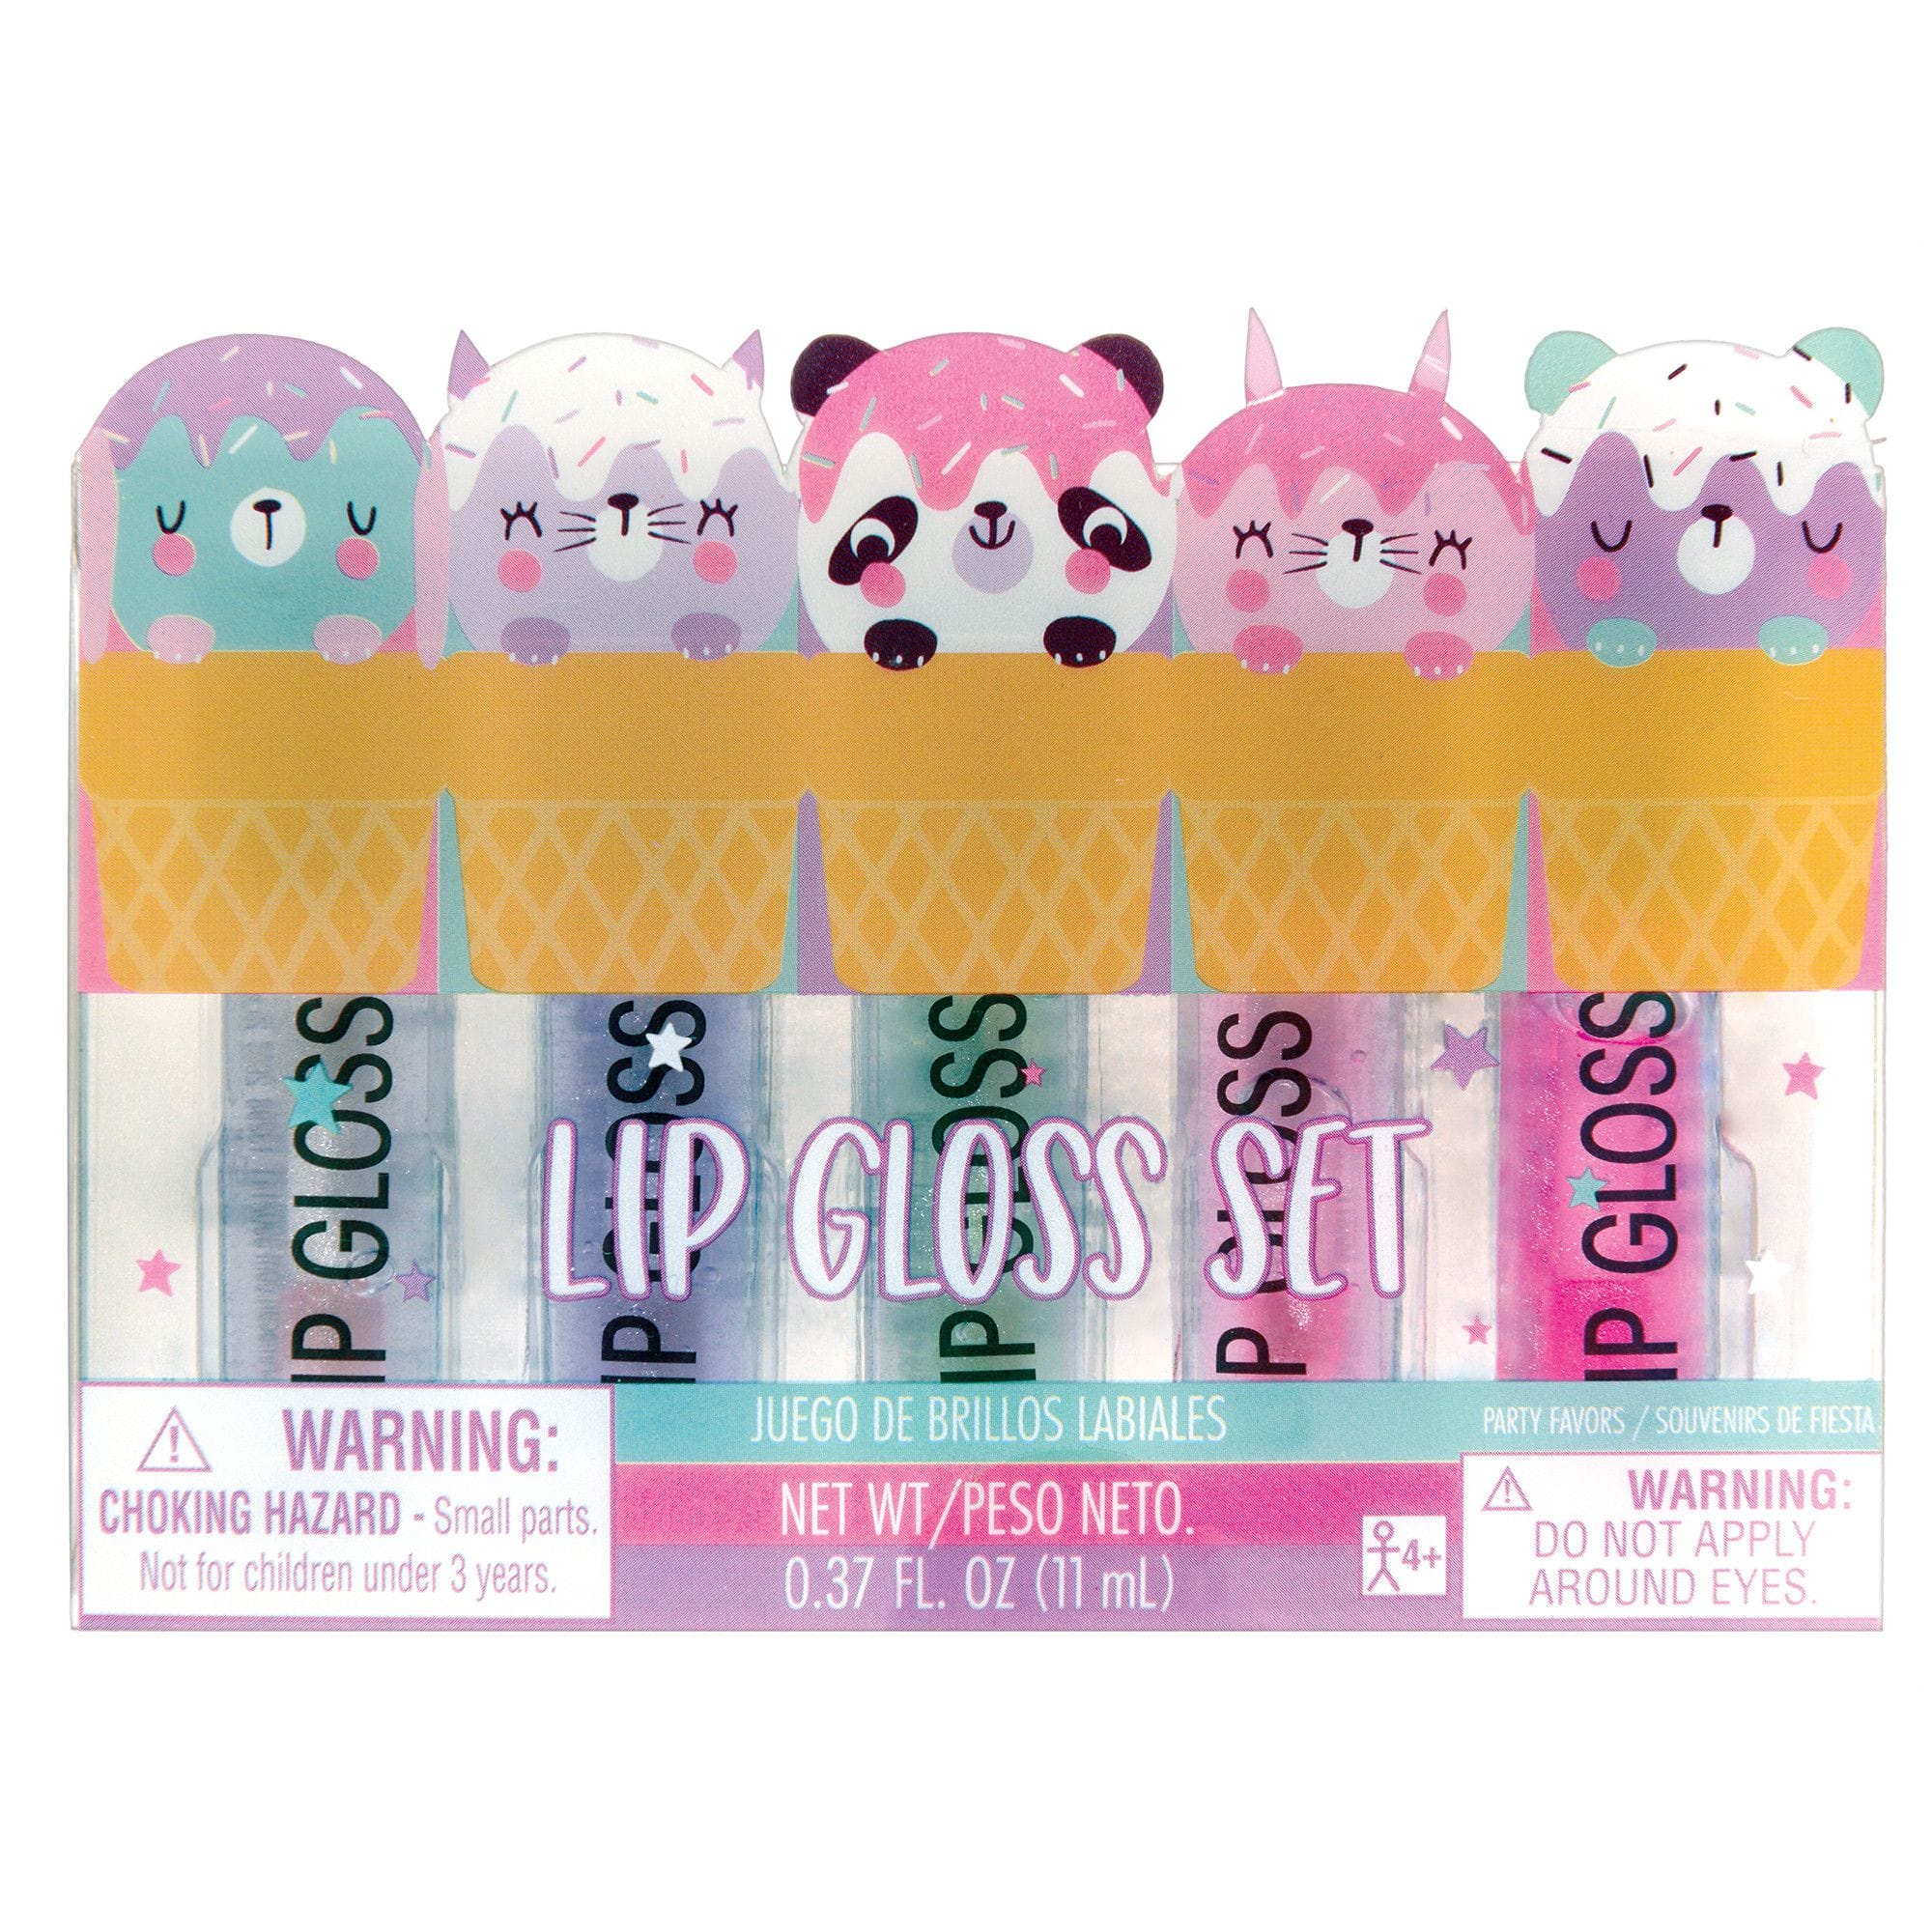 Snow Bunny Lip Gloss - the perfect topper over your lipstick or on